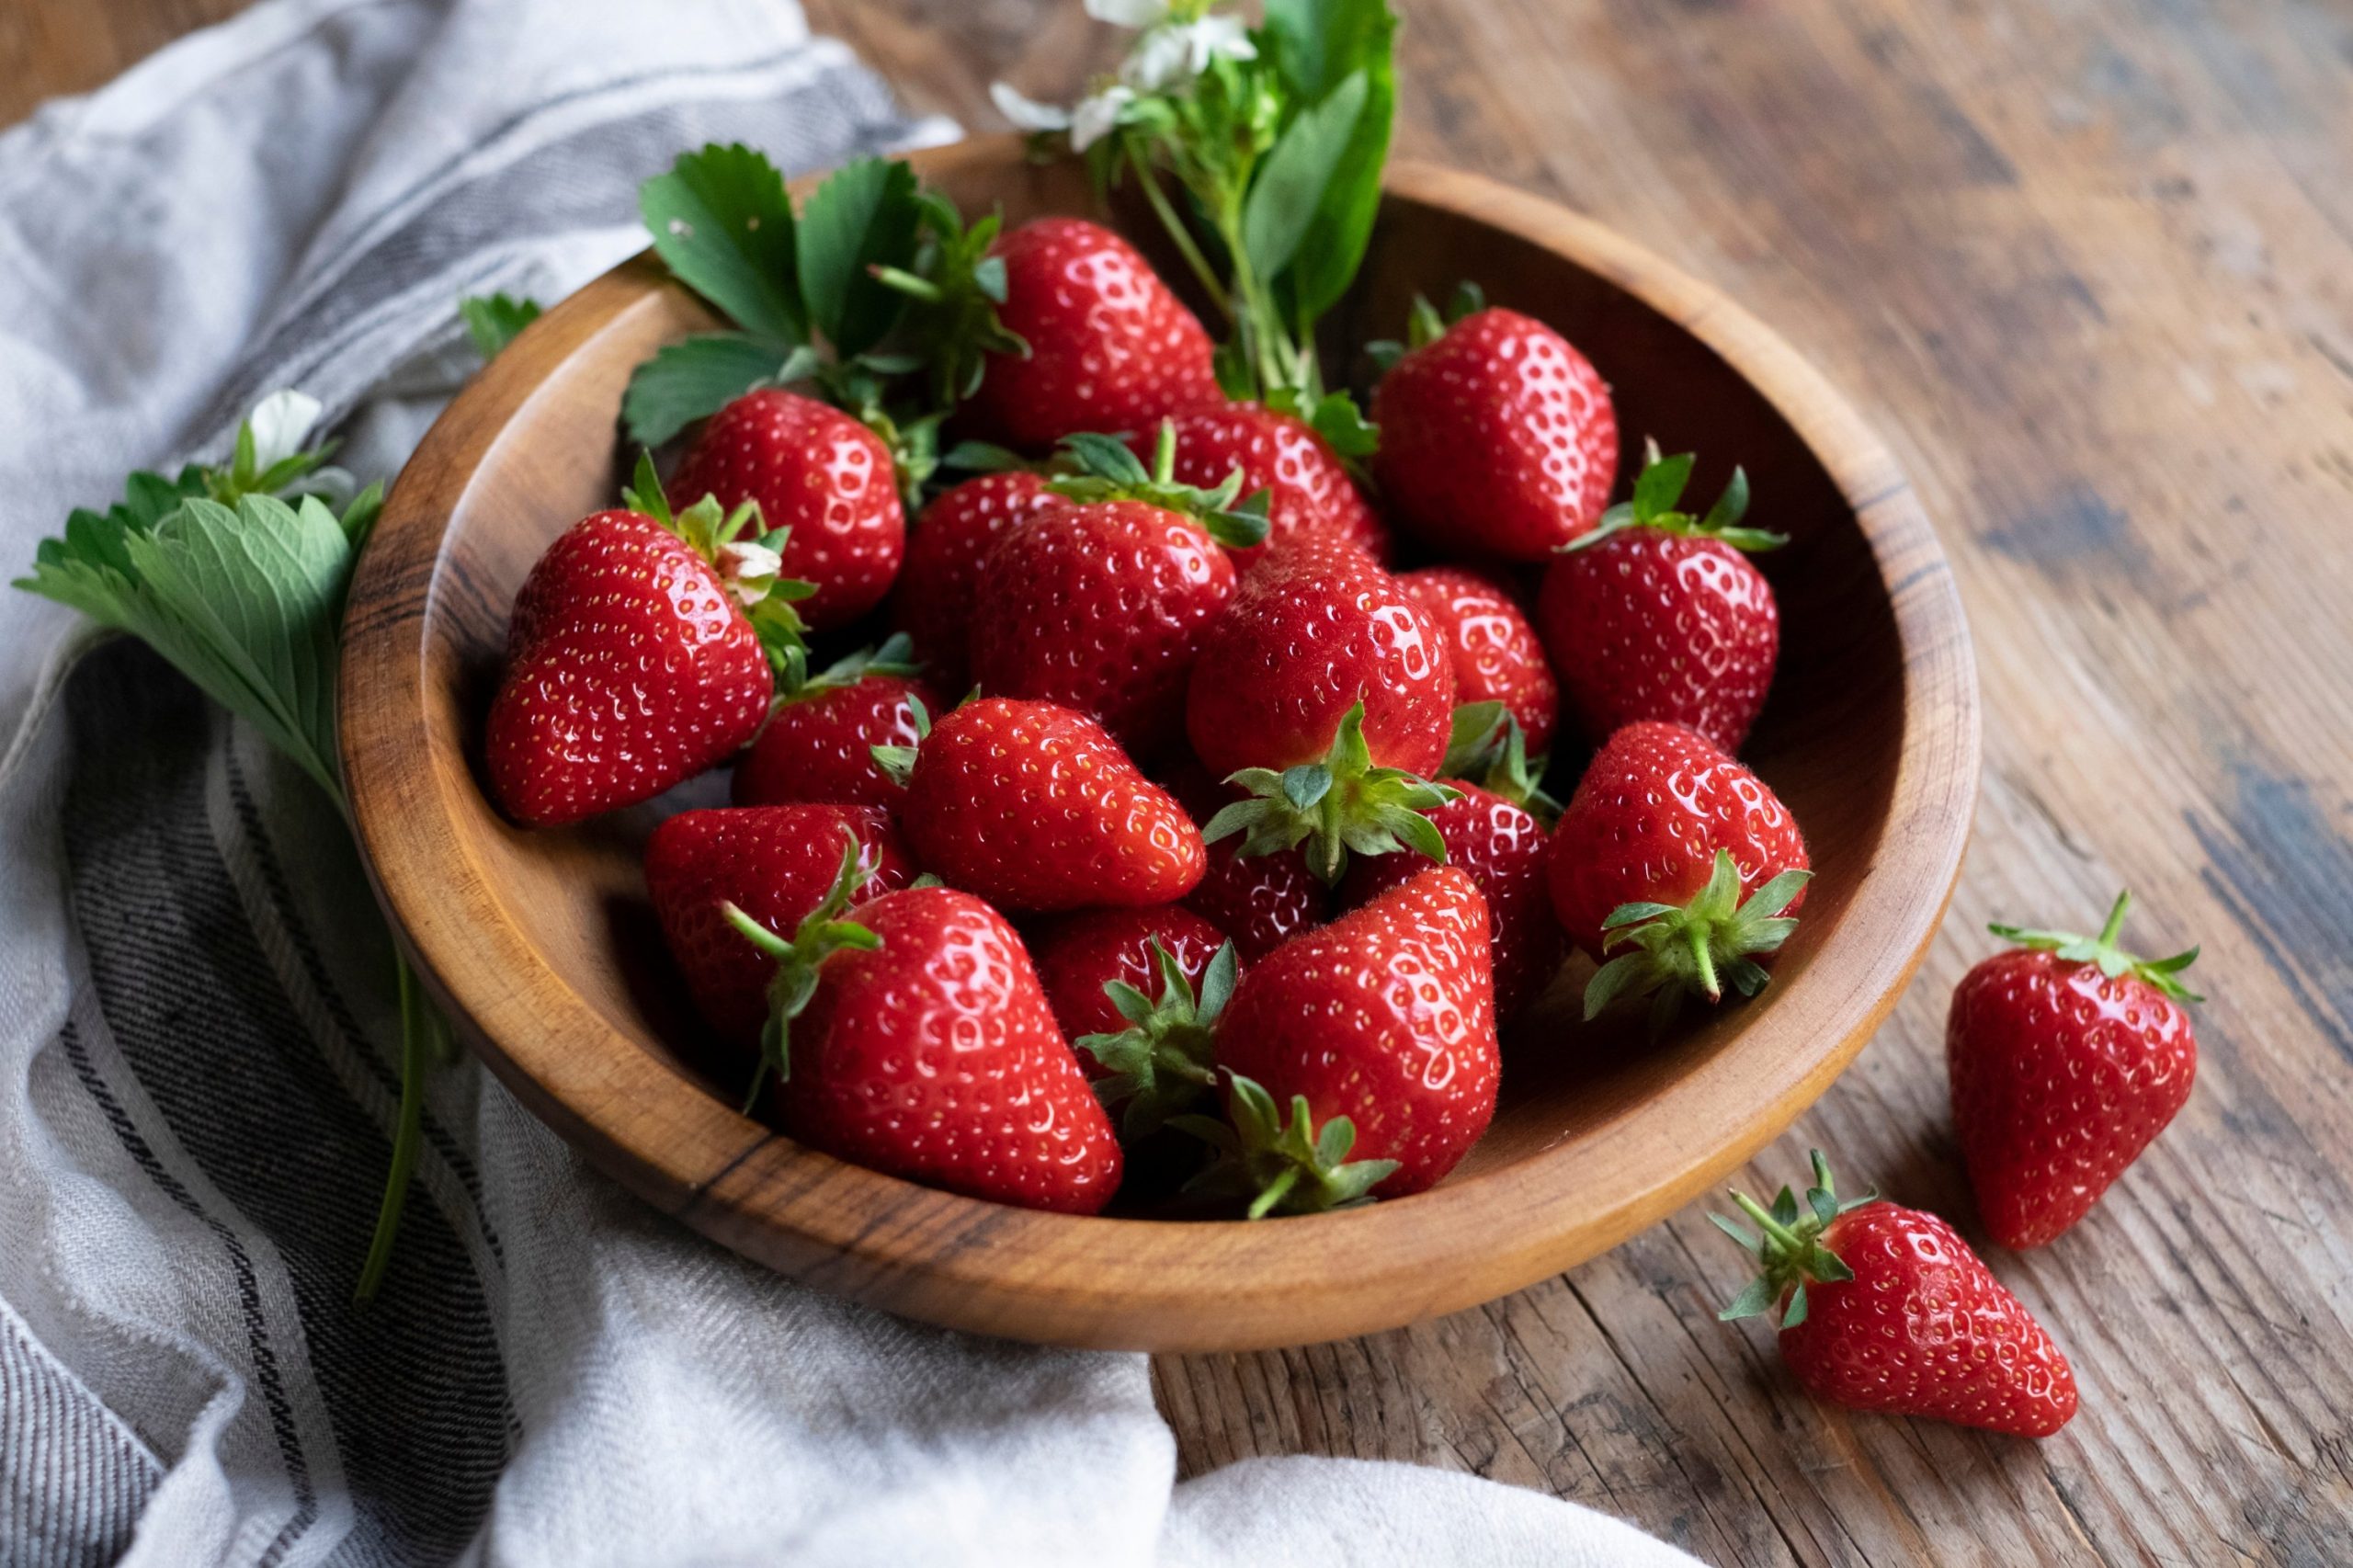 Strawberries: What Are Their Health Benefits?